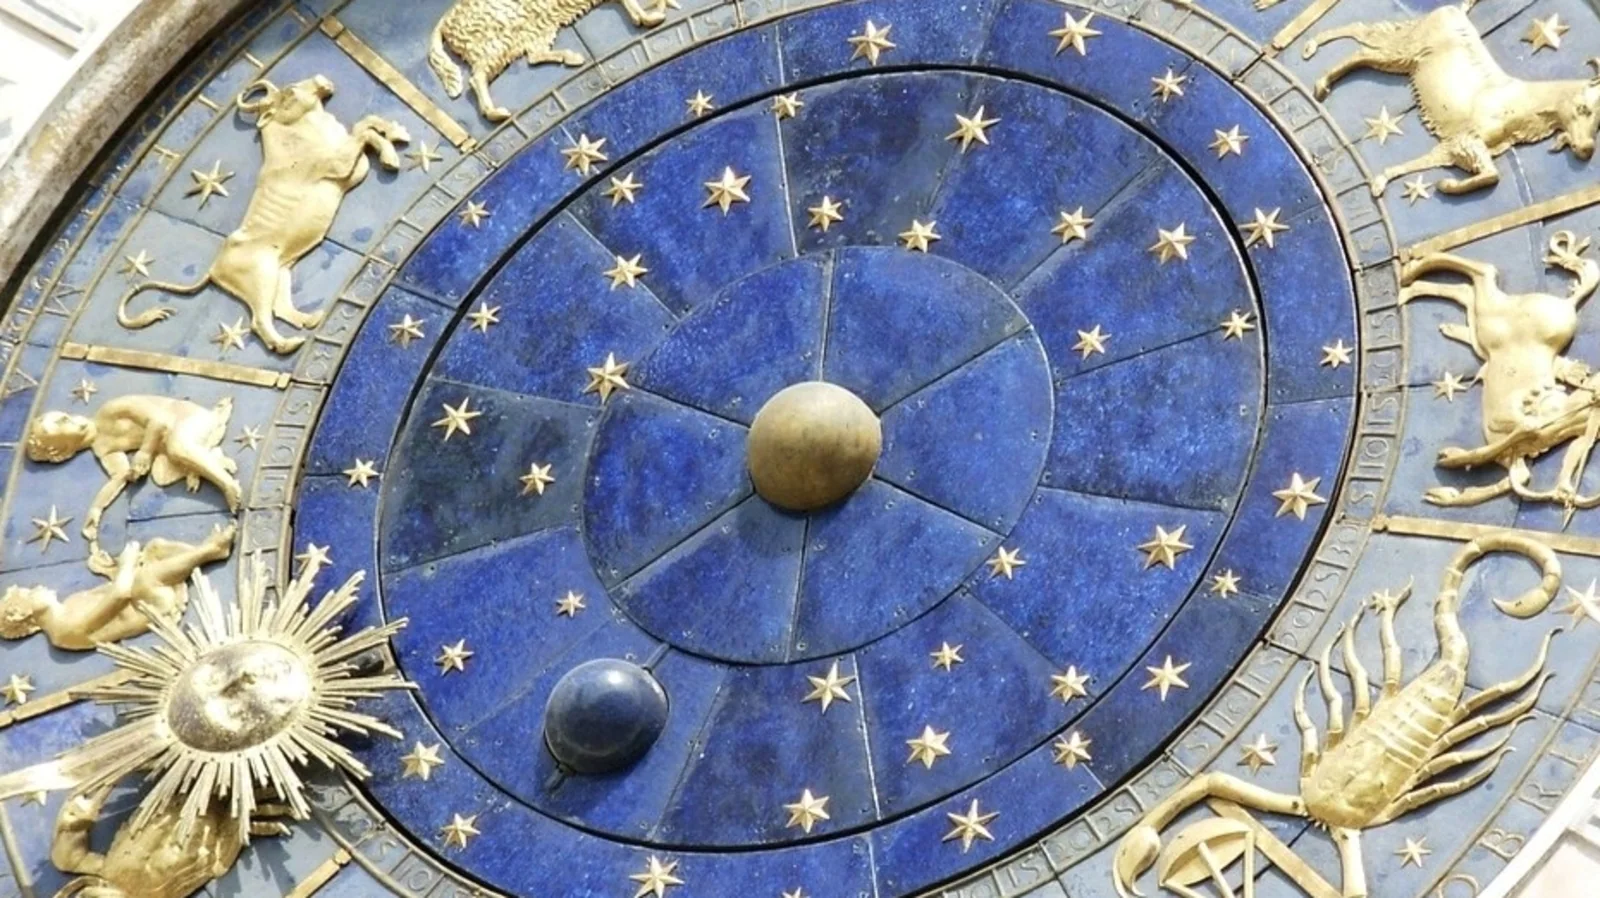 Horoscope Today: Astrological prediction for May 12, 2022